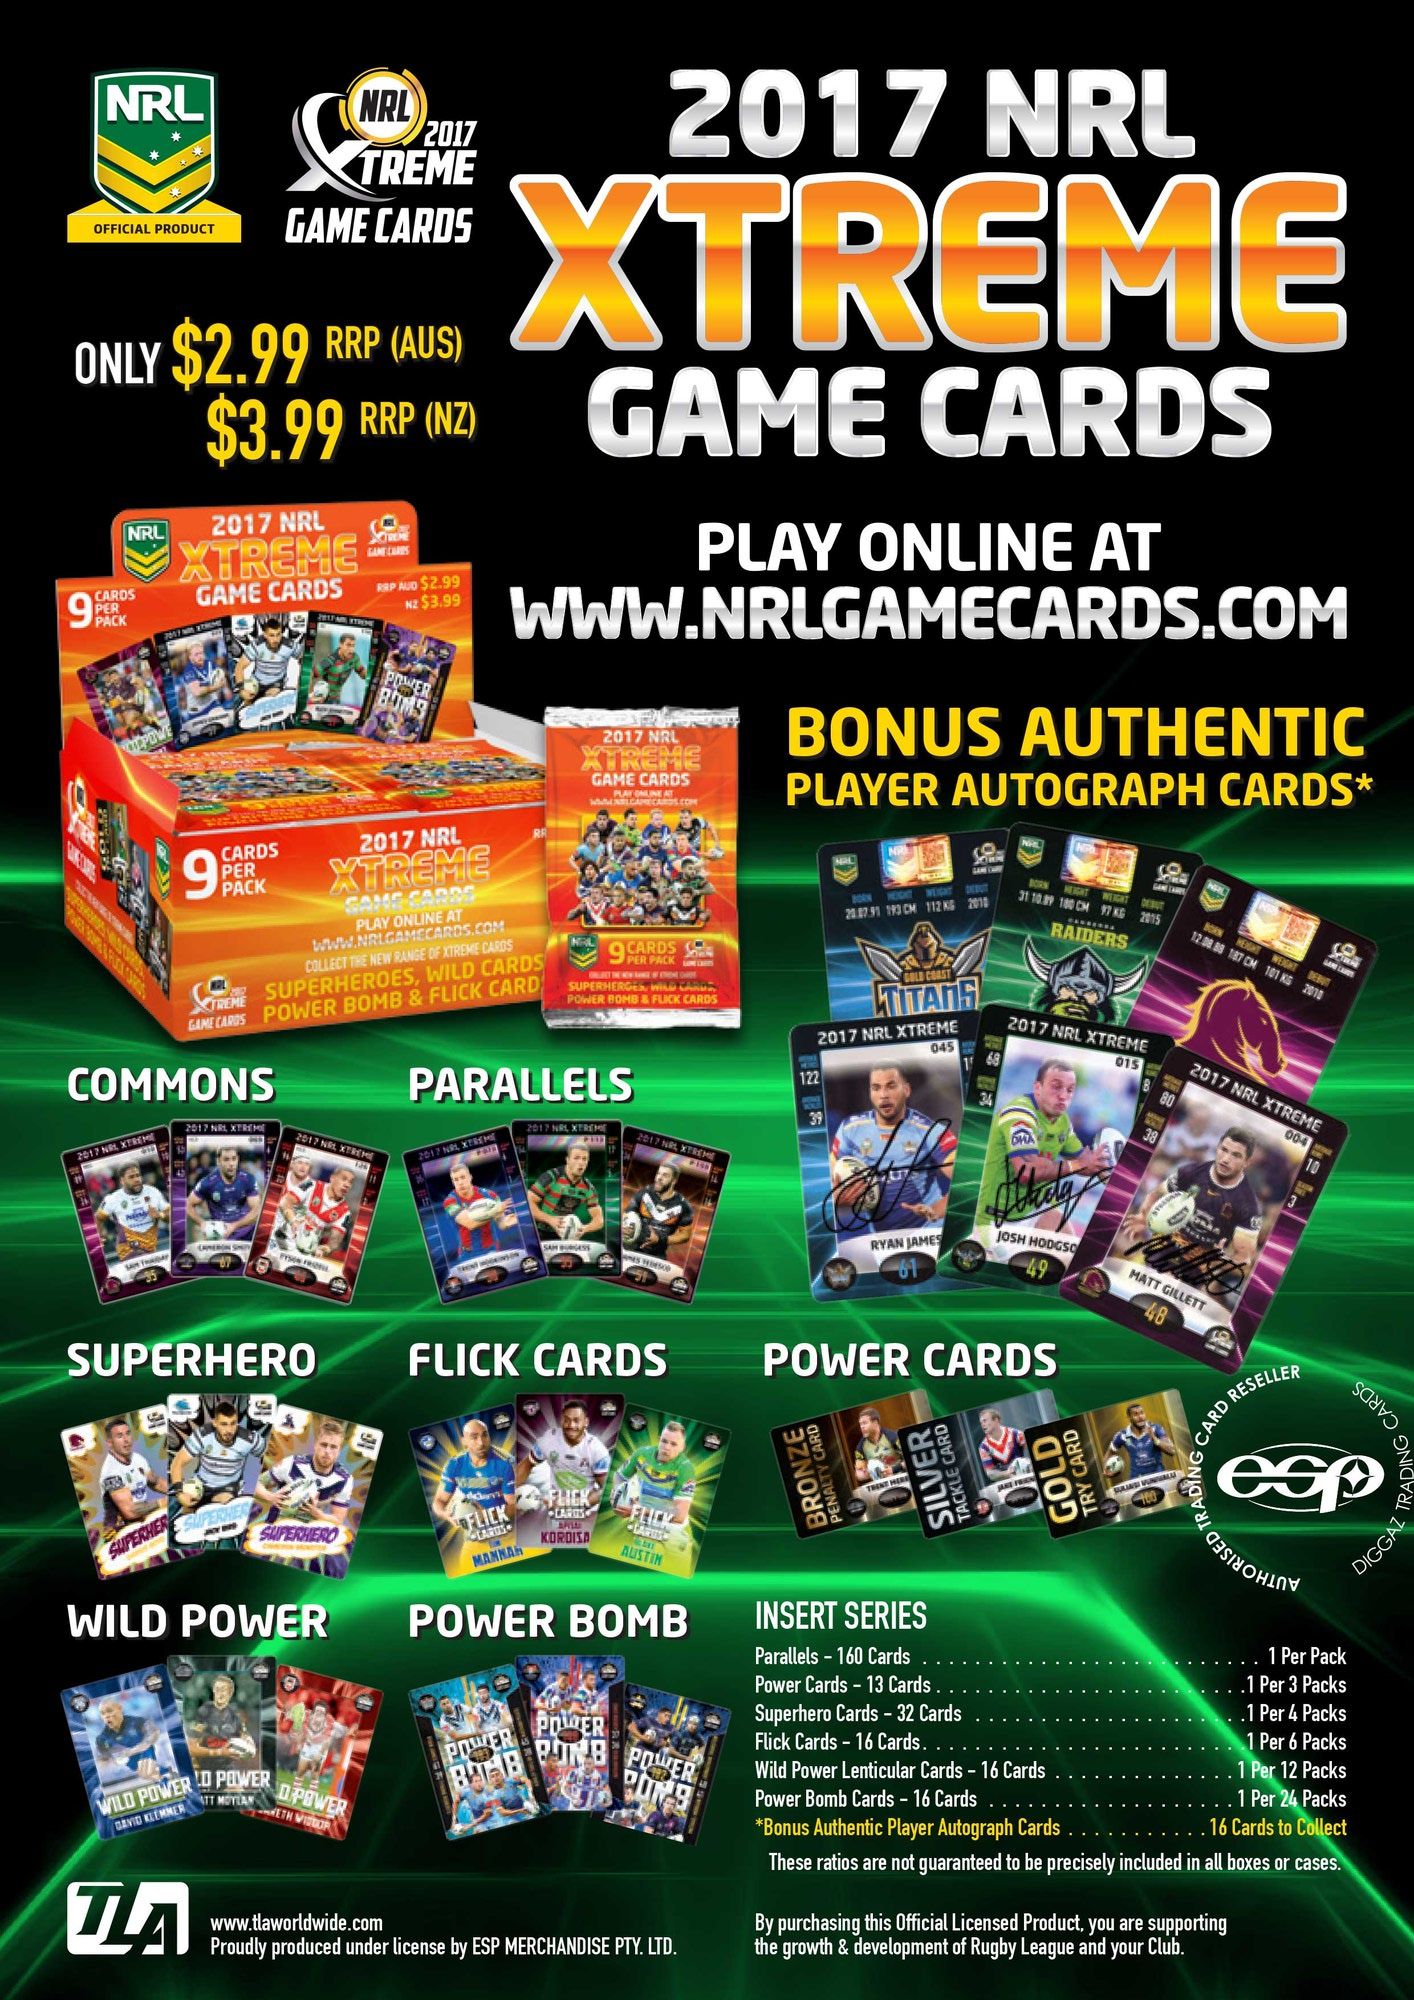 Nrl 2017 Xtreme Game Cards Cdu Of 24 BRAND NEW 